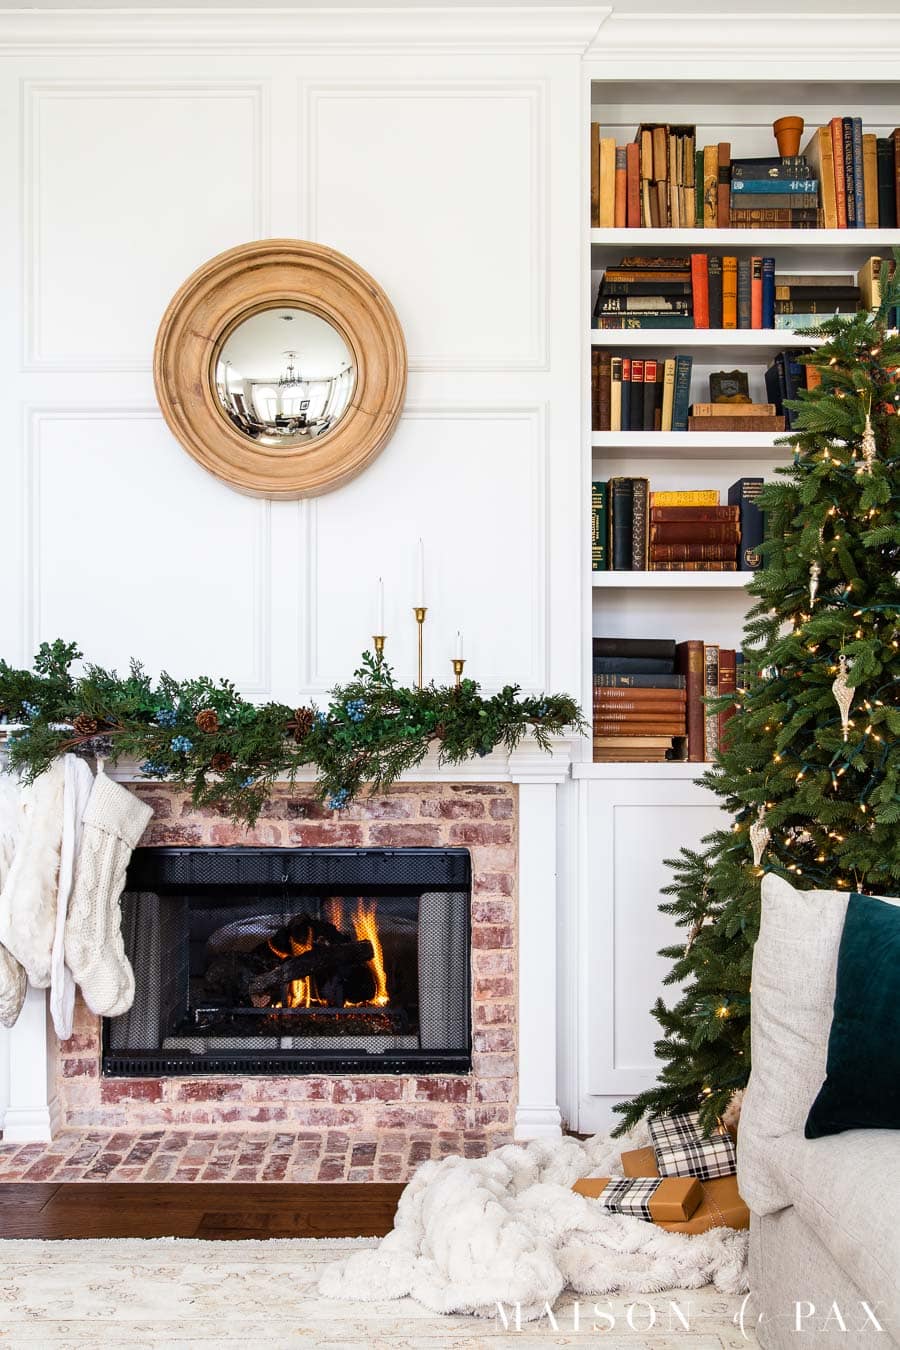 Grow Décor: Best plants for home-grown holiday greenery